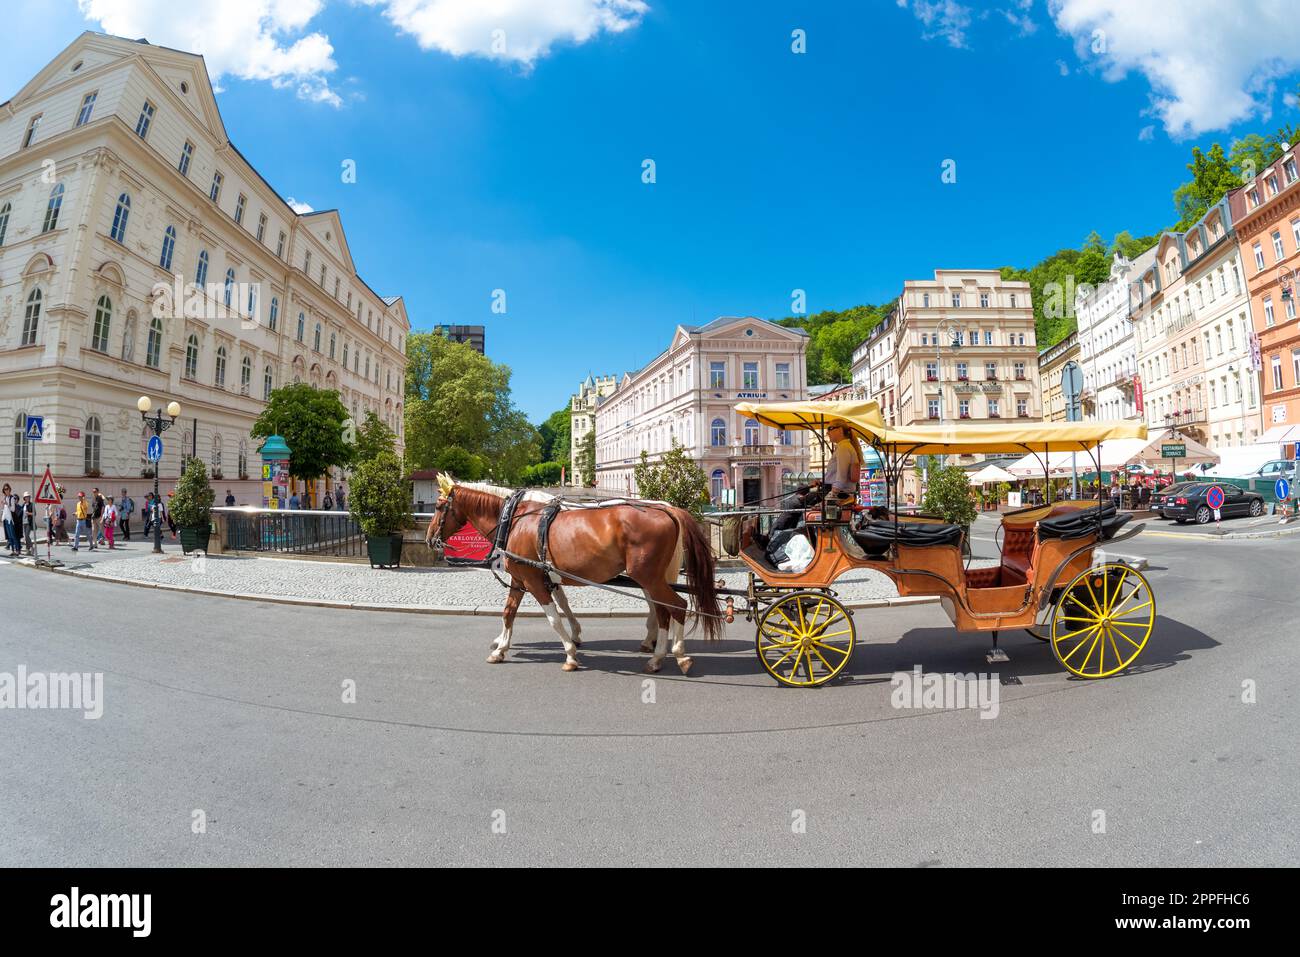 Karlovy Vary, Czech Republic - May 25 2019: Two horses harnessed to the carriage Stock Photo